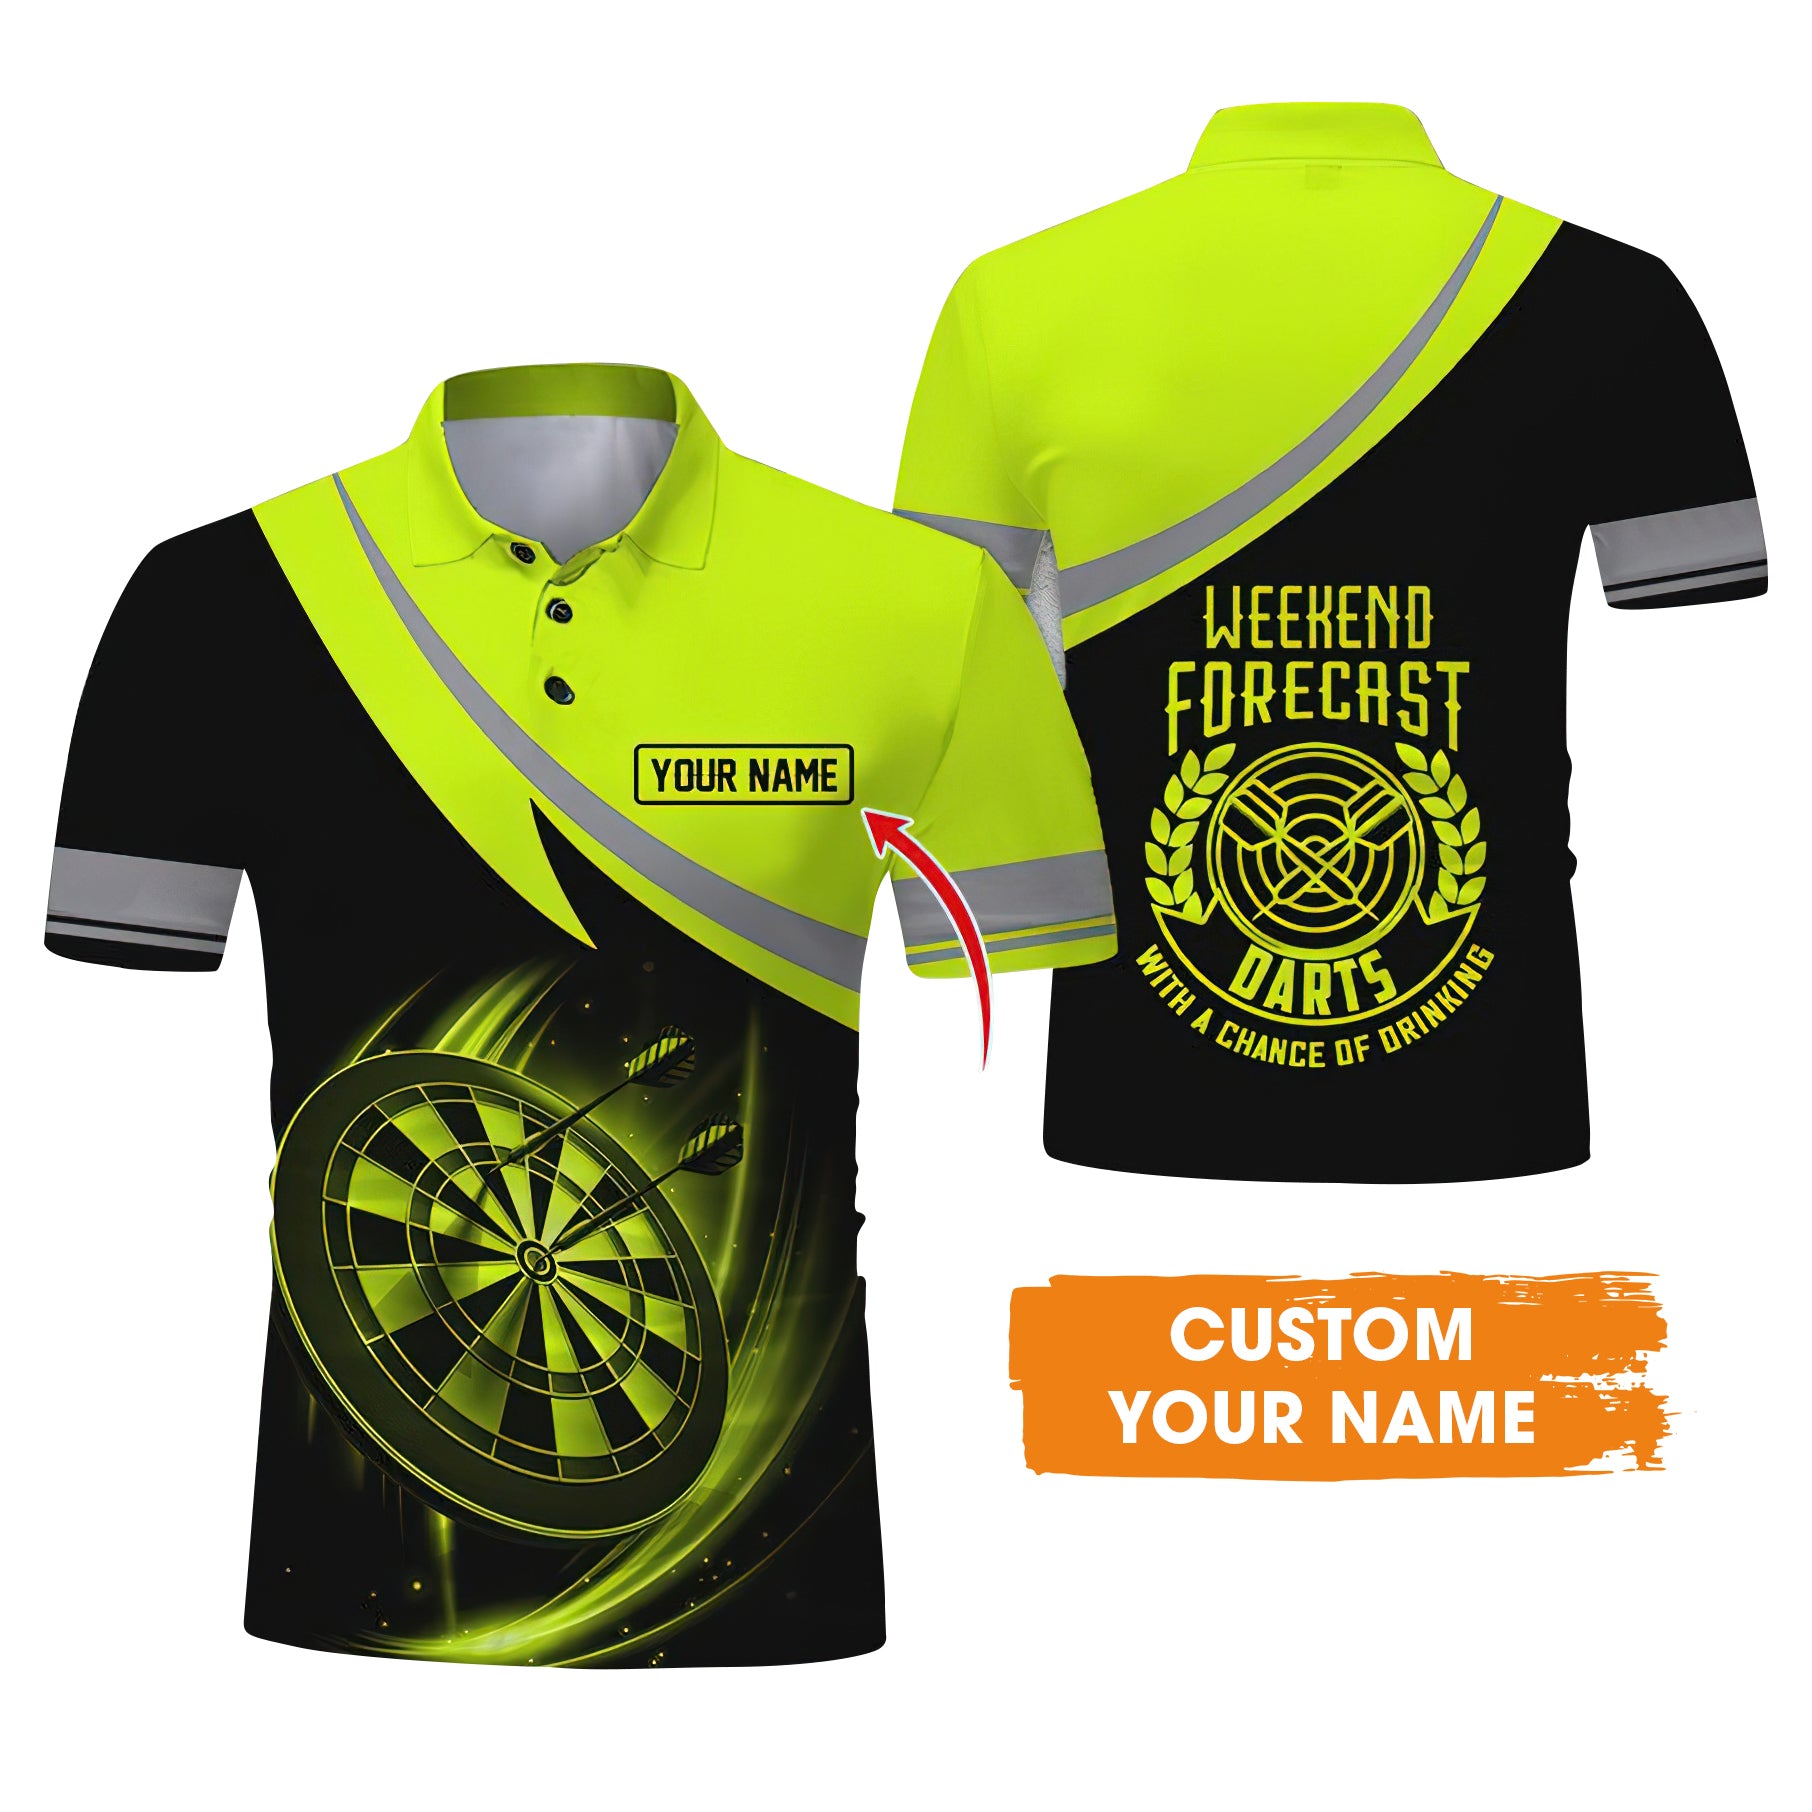 Customized Name Darts Polo Shirt, Personalized Name Weekend Forecast Darts Polo Shirt - Gift For Darts Lovers